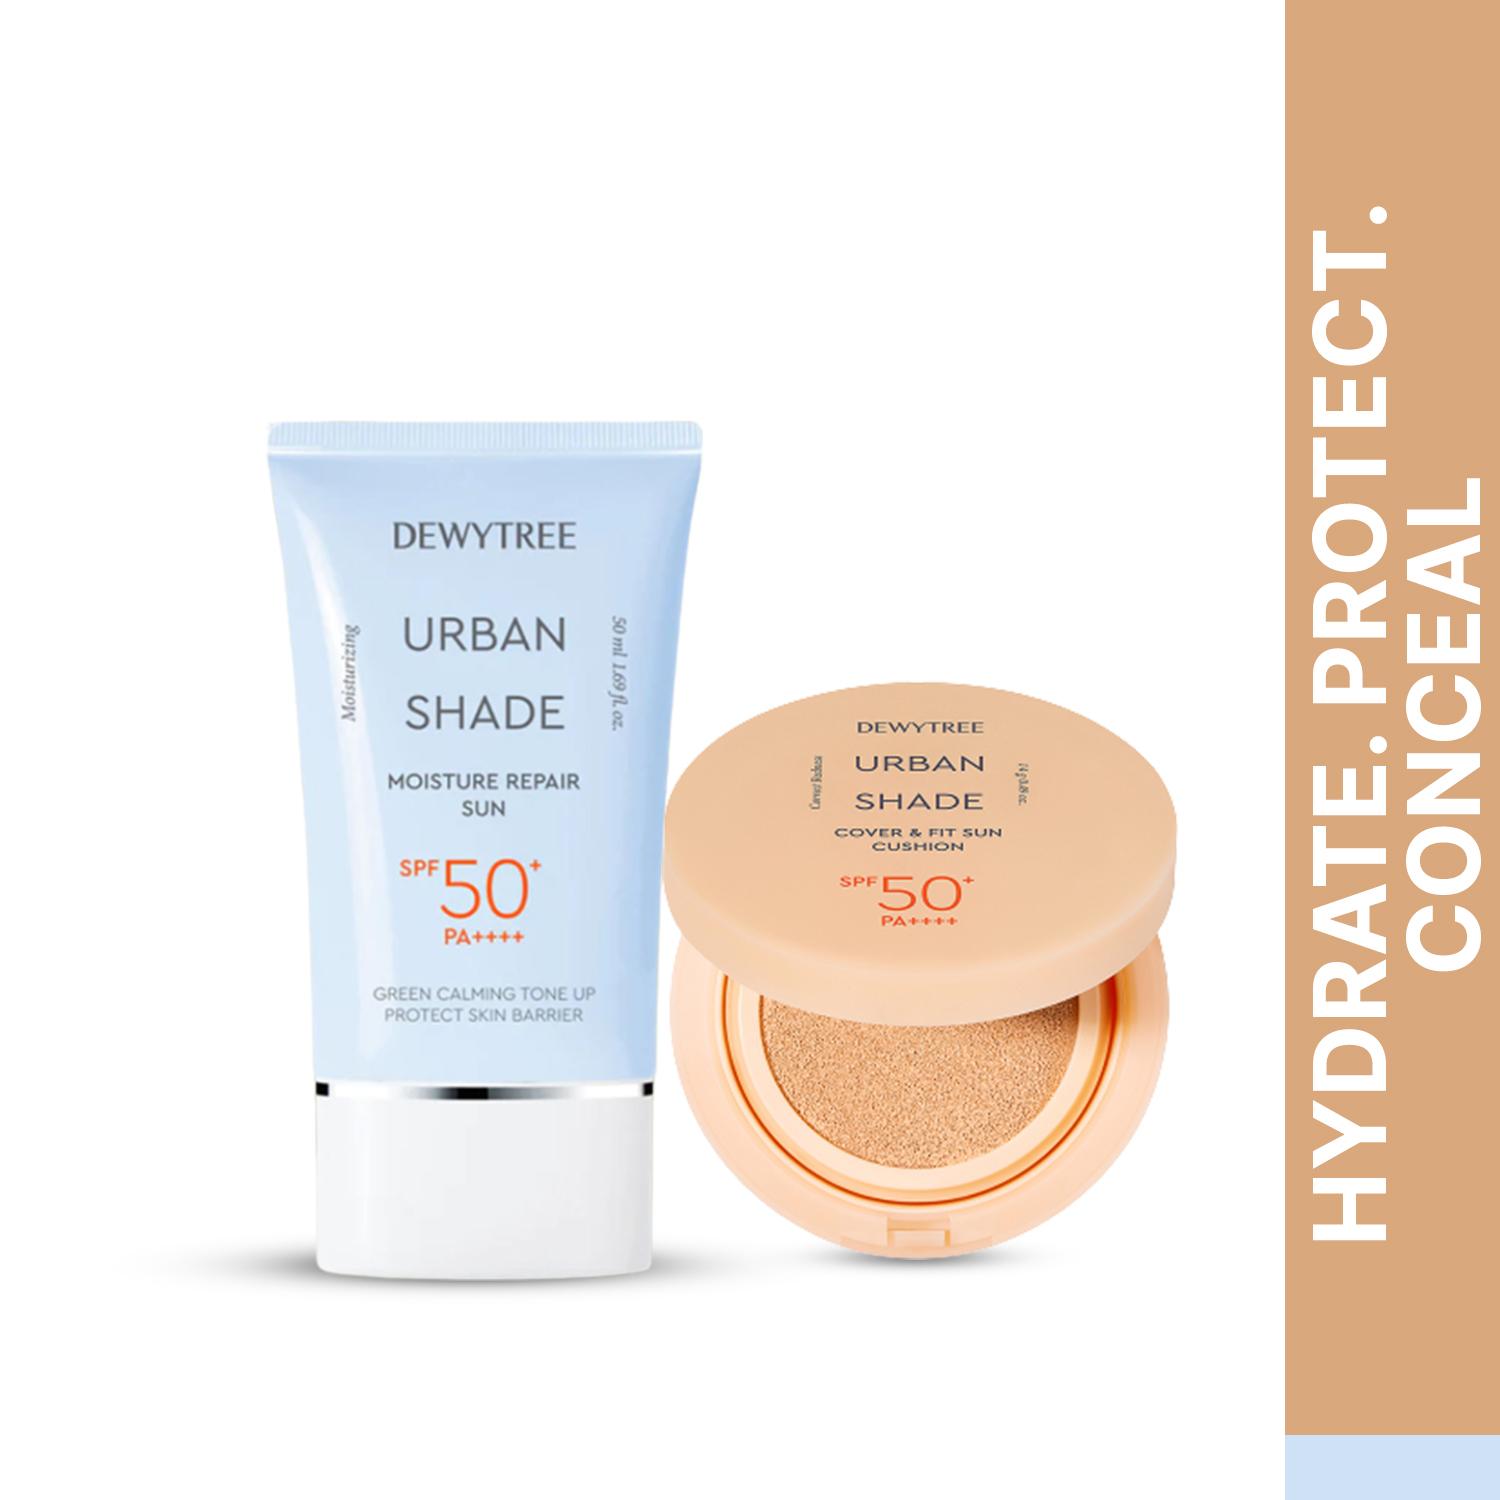 Dewytree | Dewytree Urban Shade Moisture Repair Sunscreen SPF And Cover & Fit Sun Cushion SPF Combo